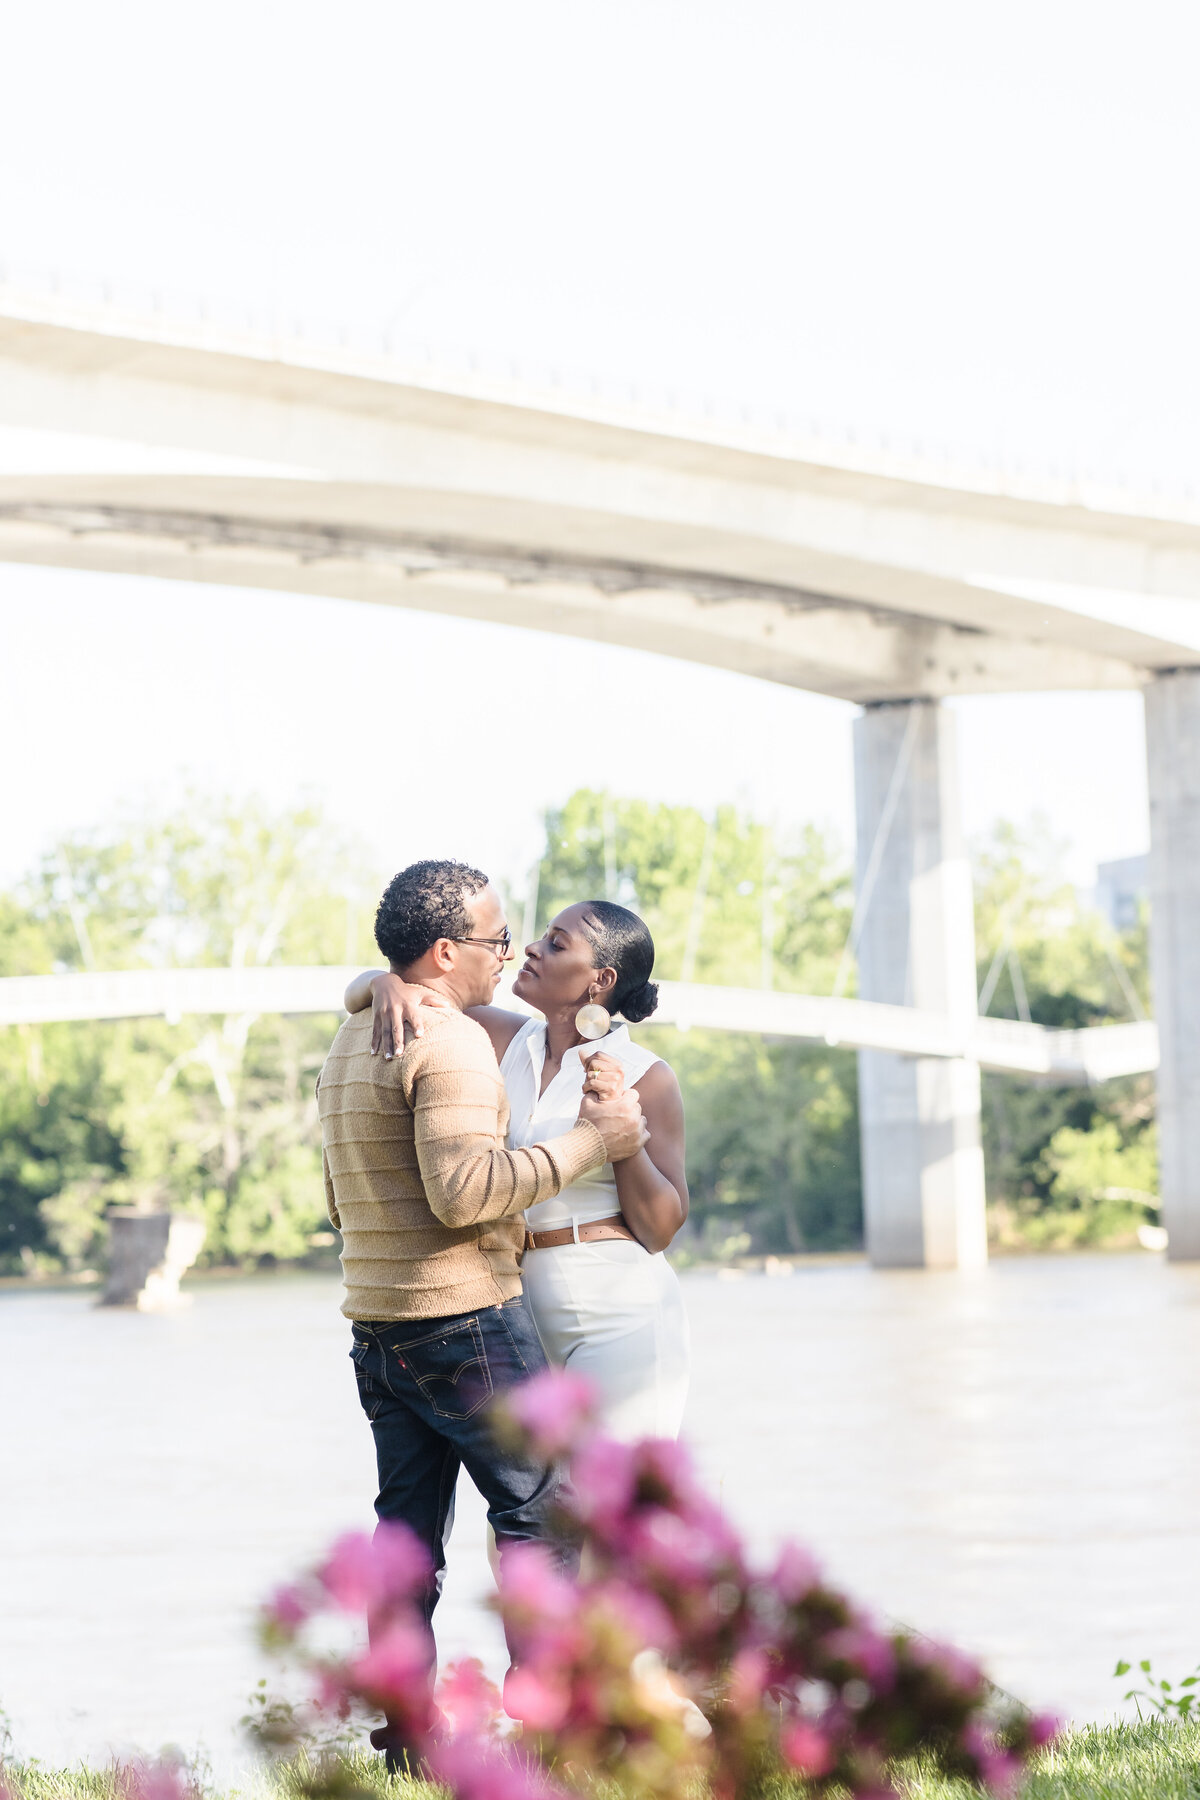 man and woman embrace under bridge by river with spring blooms in the foreground